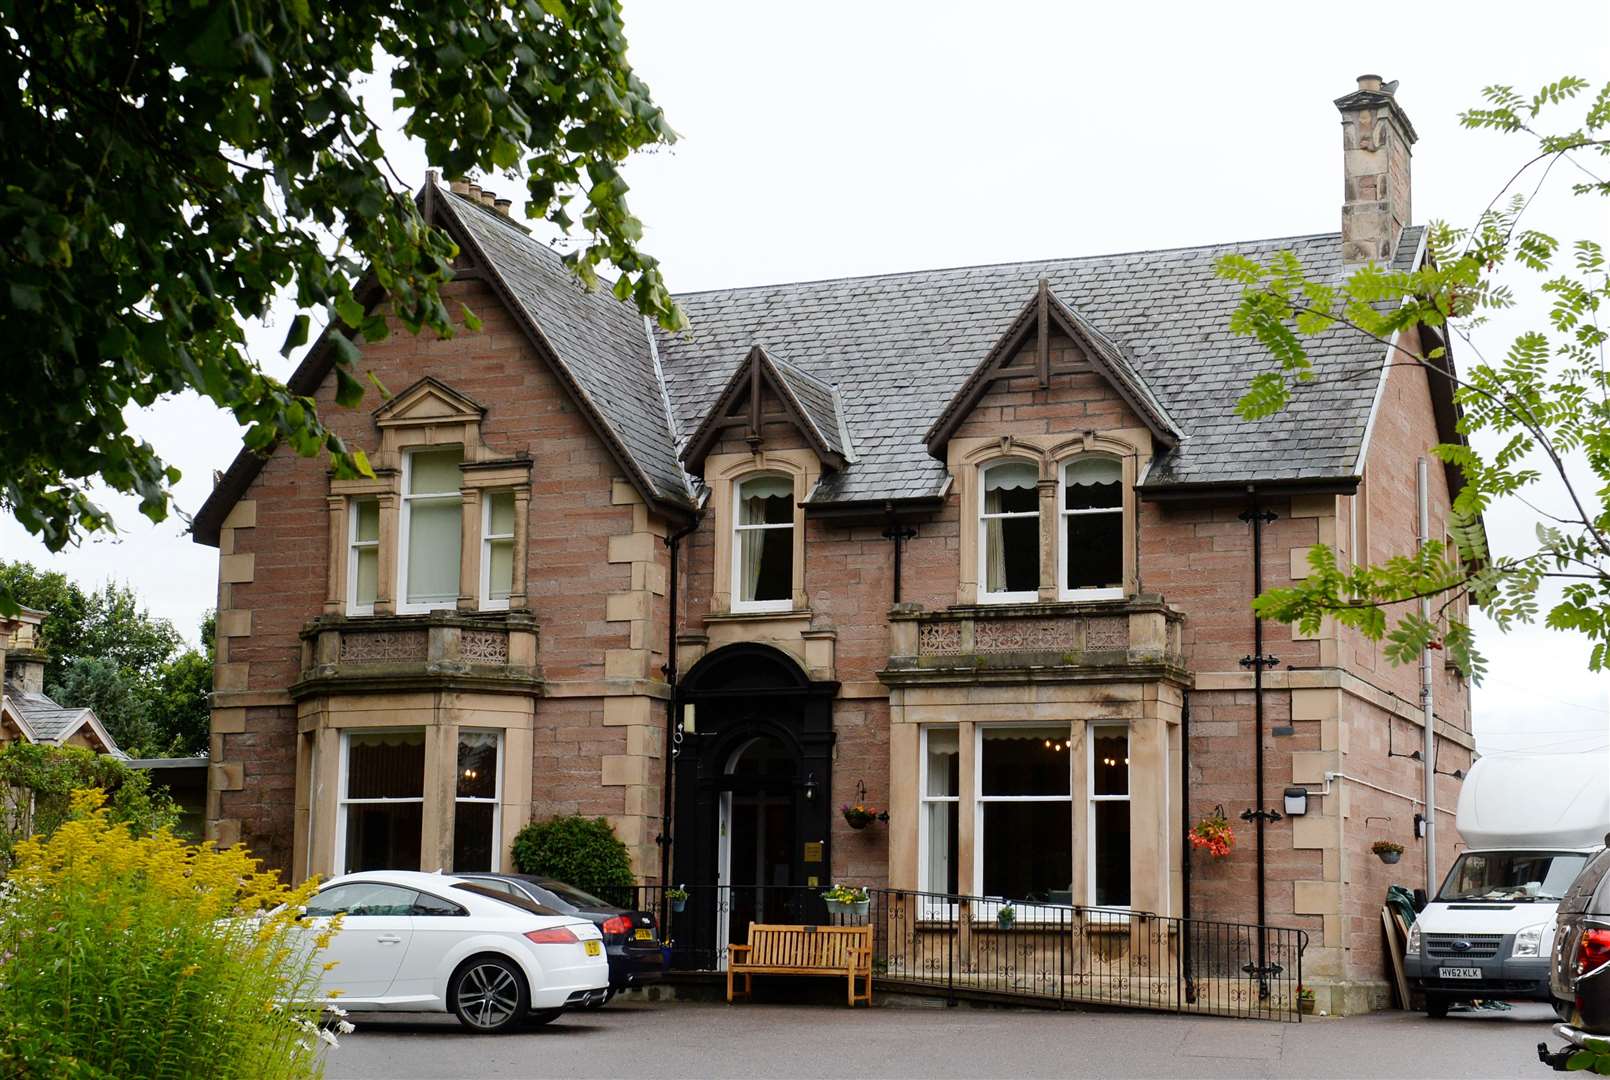 Southside Care Home in Inverness.